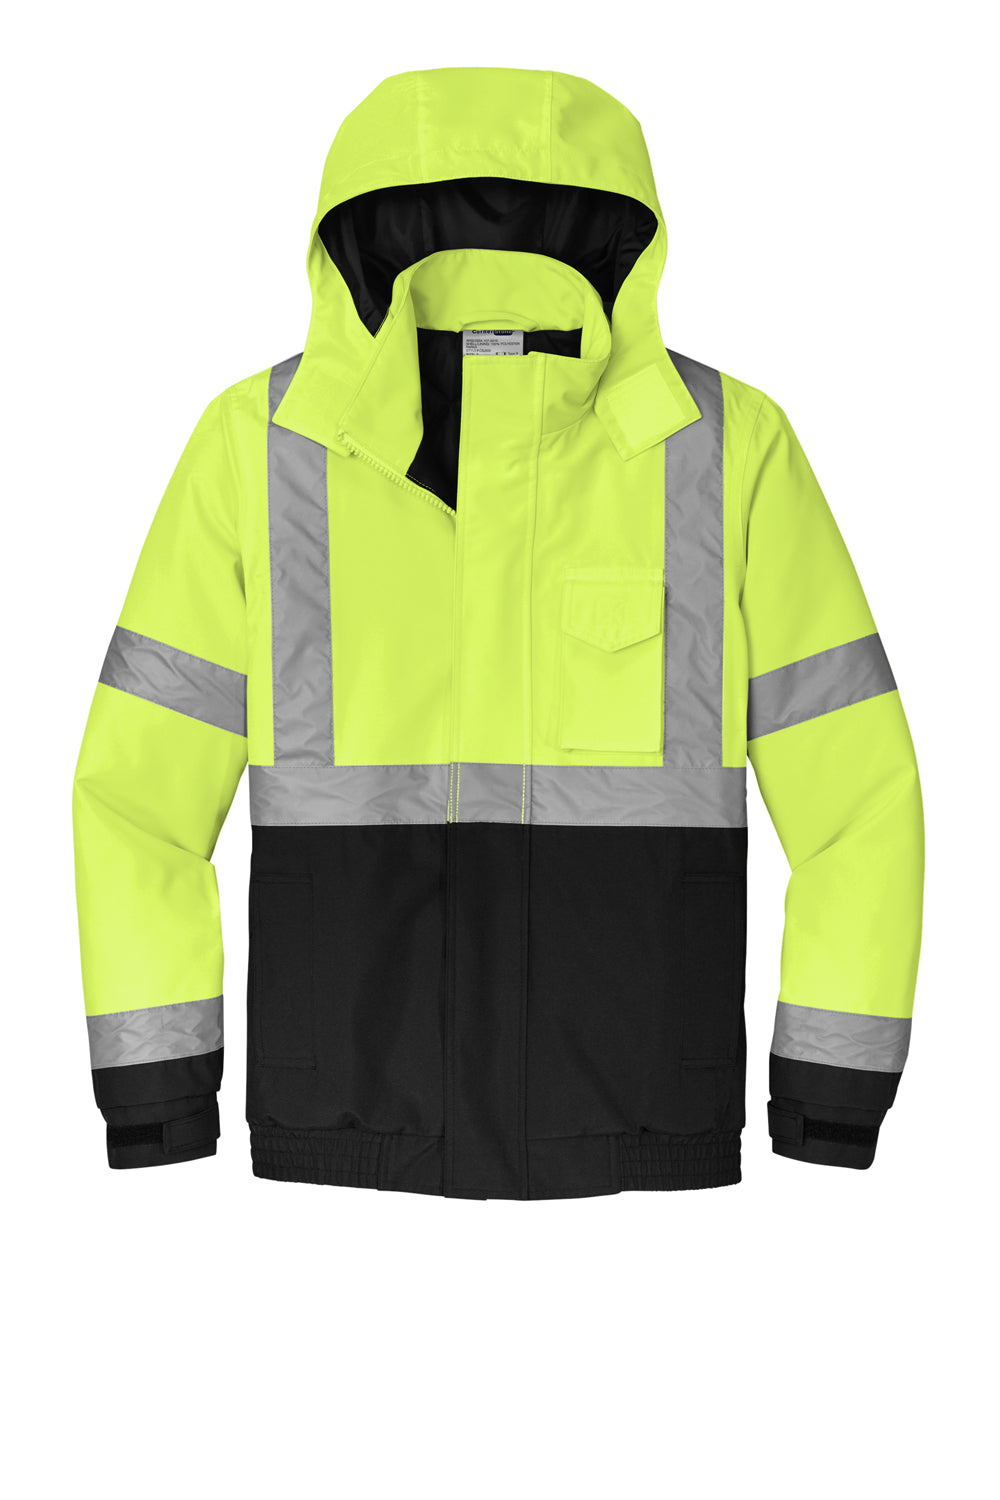 CornerStone CSJ500 Enhanced Visibility Insulated Full Zip Hooded Jacket Safety Yellow Flat Front